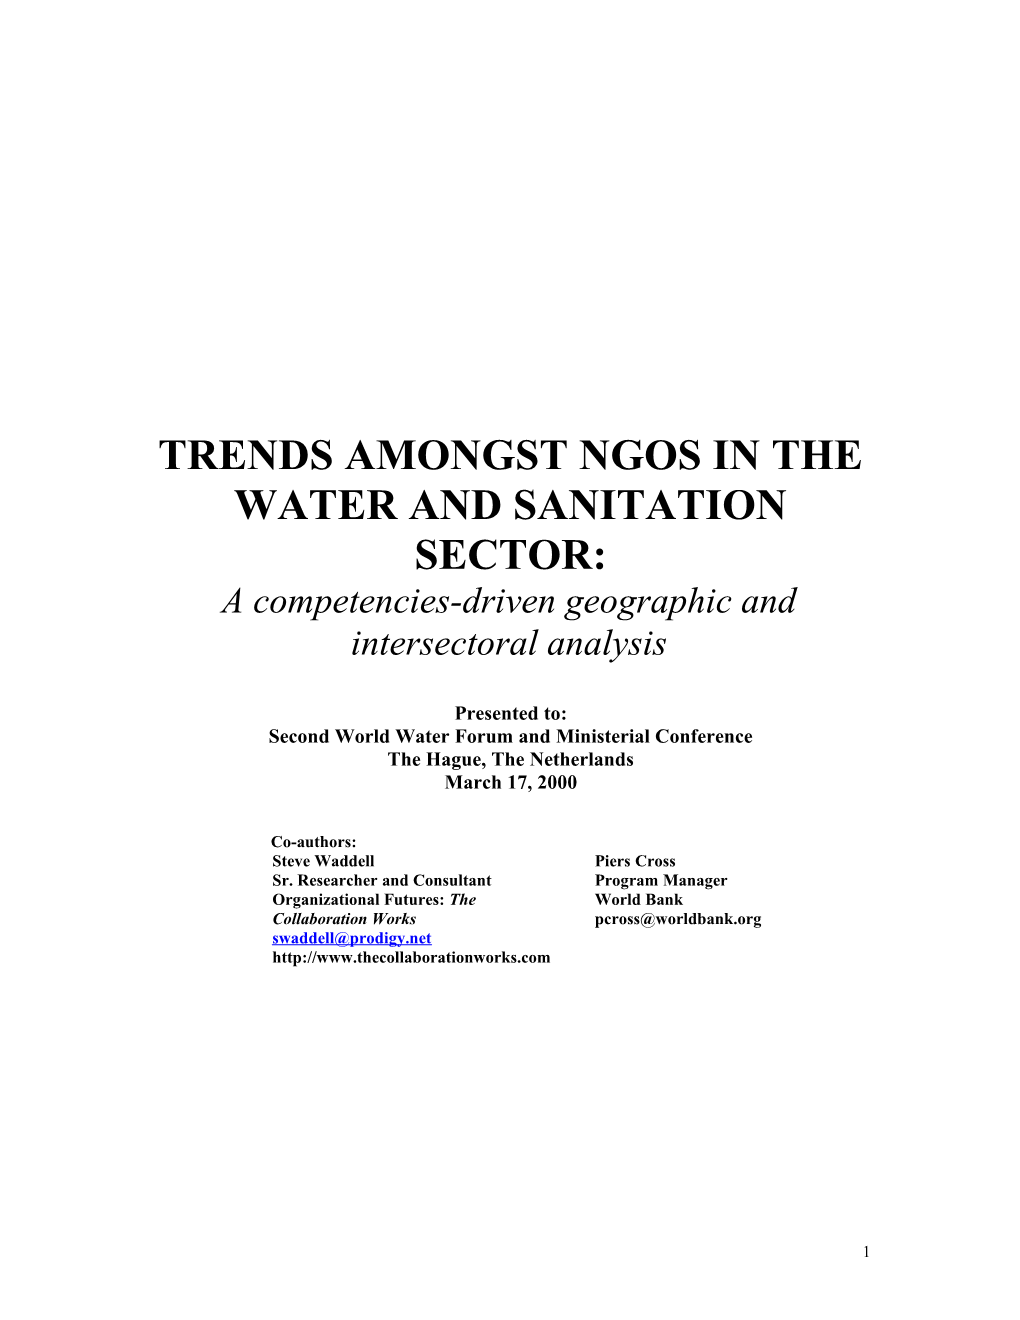 Trends Amongst Ngos in the Water and Sanitation Sector